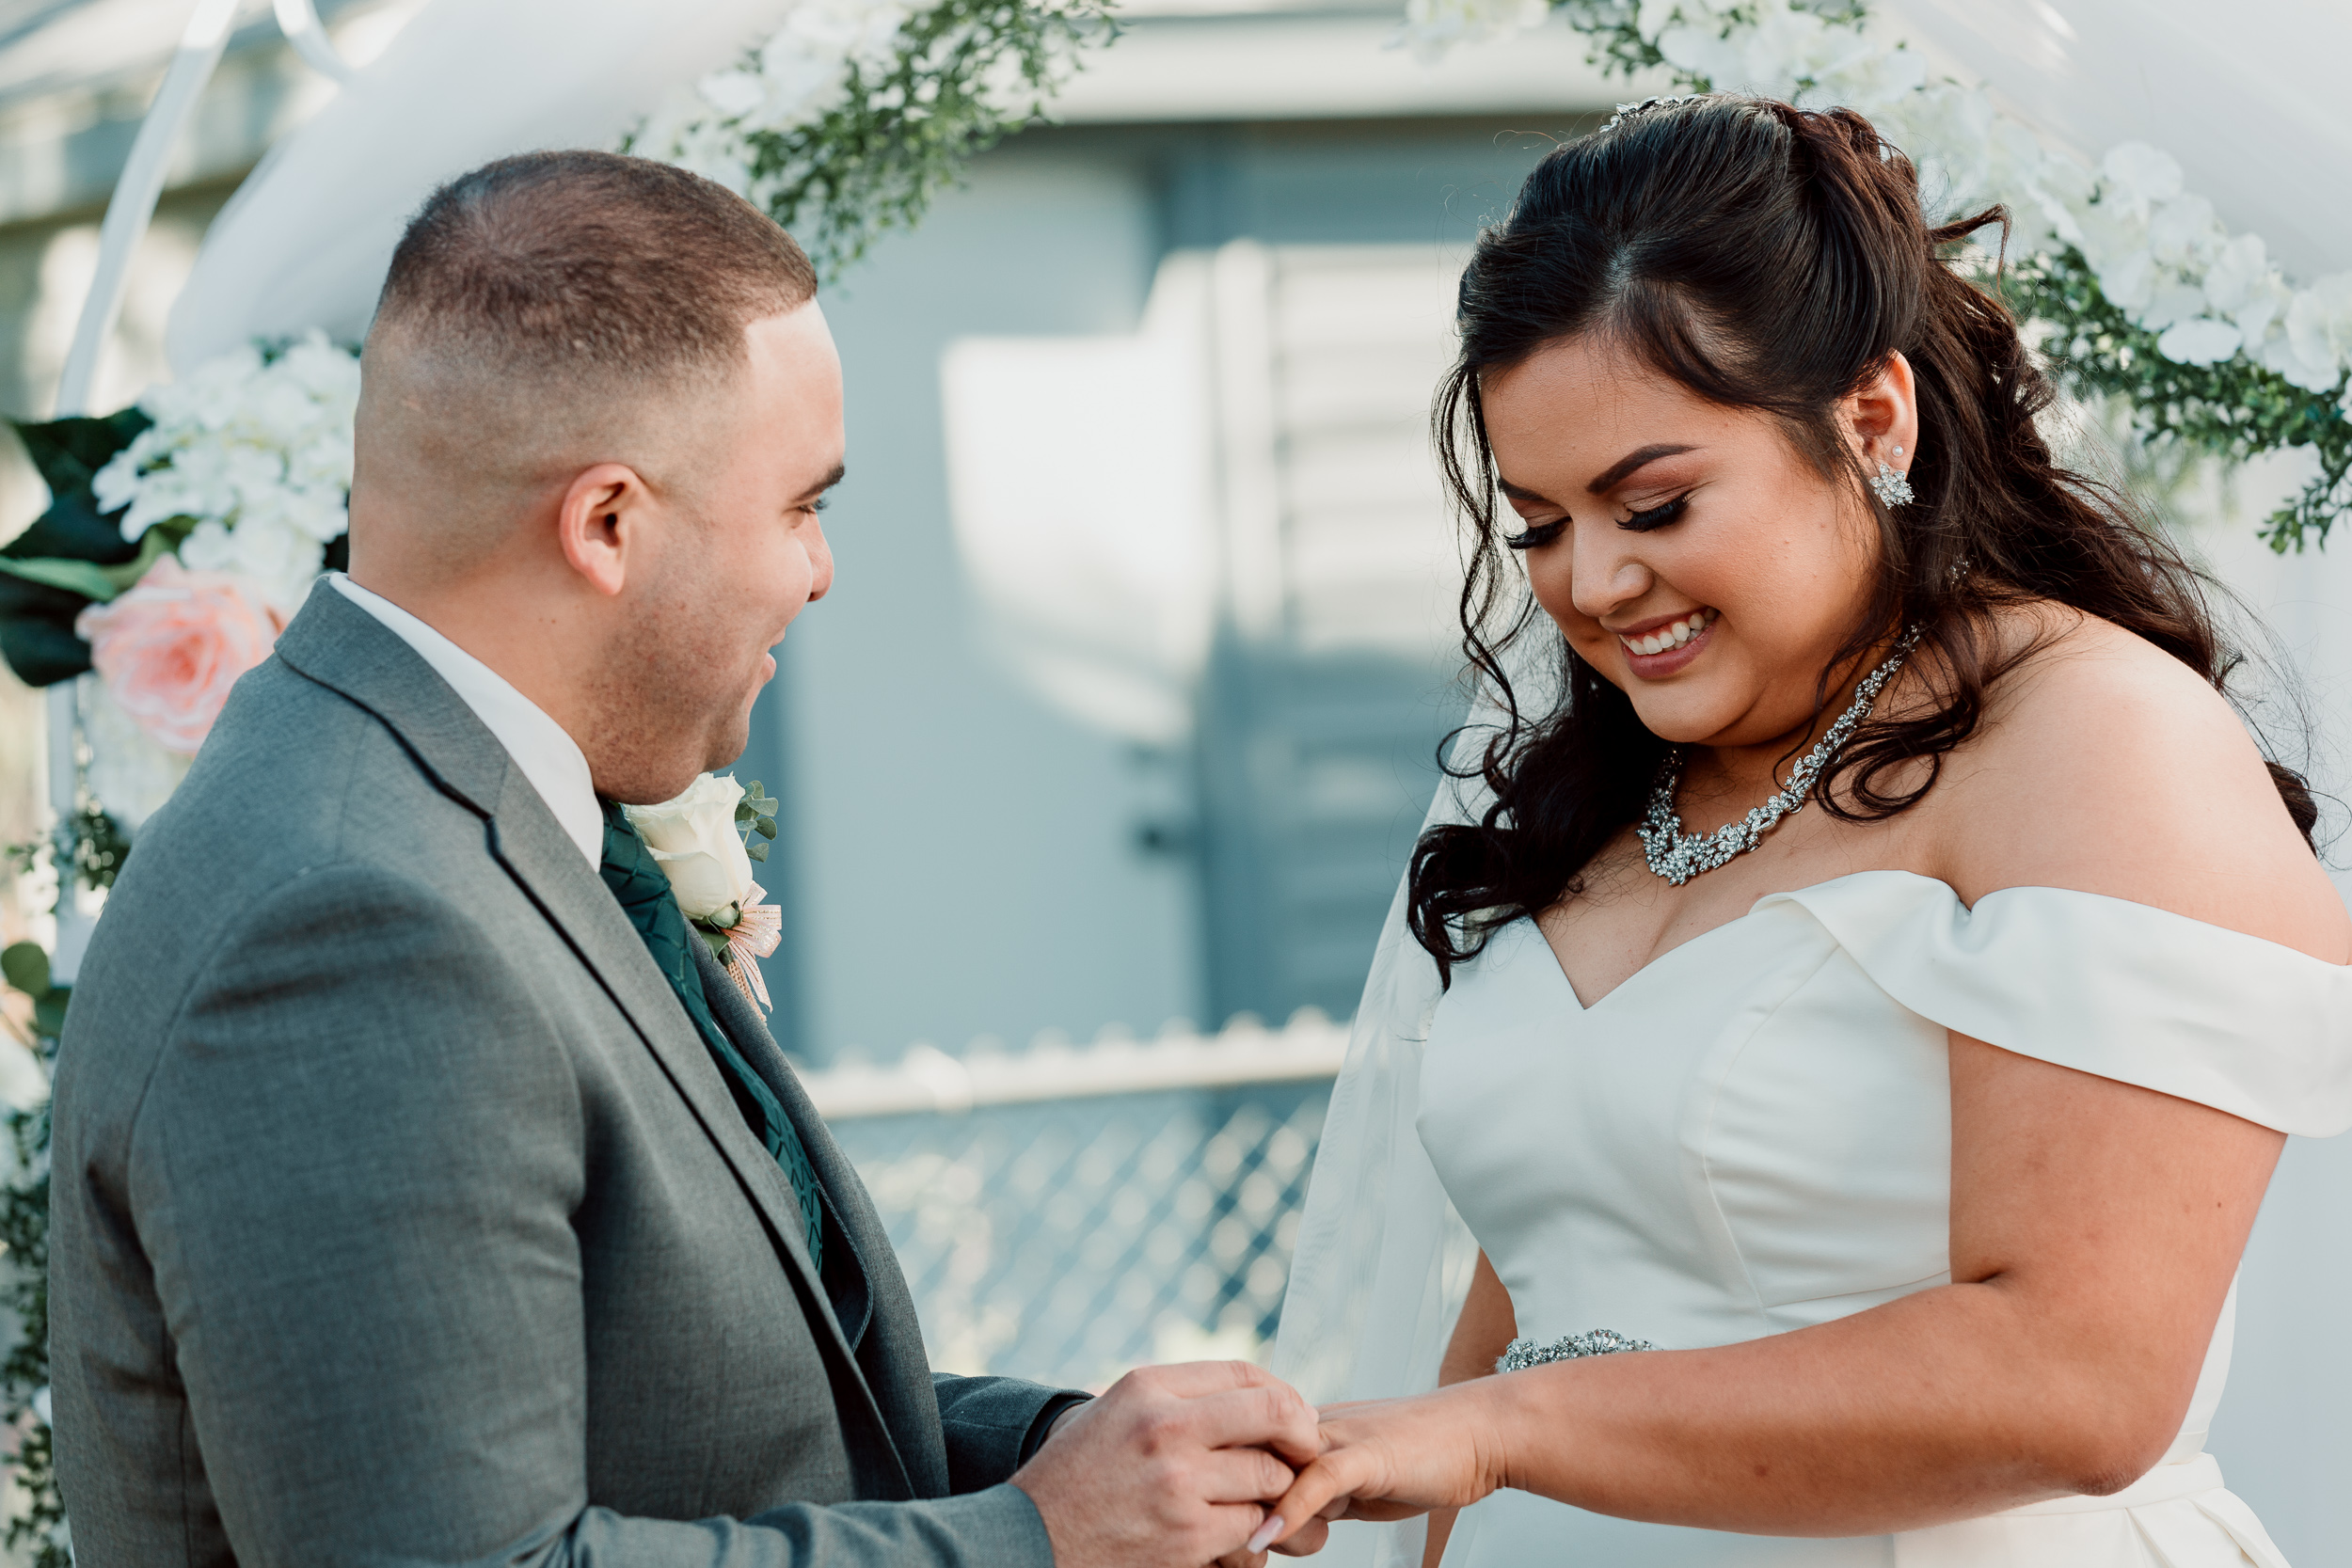 Exchanging vows and rings at wedding ceremony | Backyard Chicago Wedding | Emotional Chicago Wedding | Historic Downtown Riverside Wedding Photos | Chicago Wedding Photographer | Metra Station Wedding Photos | Small Weddings in Chicago | Intimate Elopements in Chicago